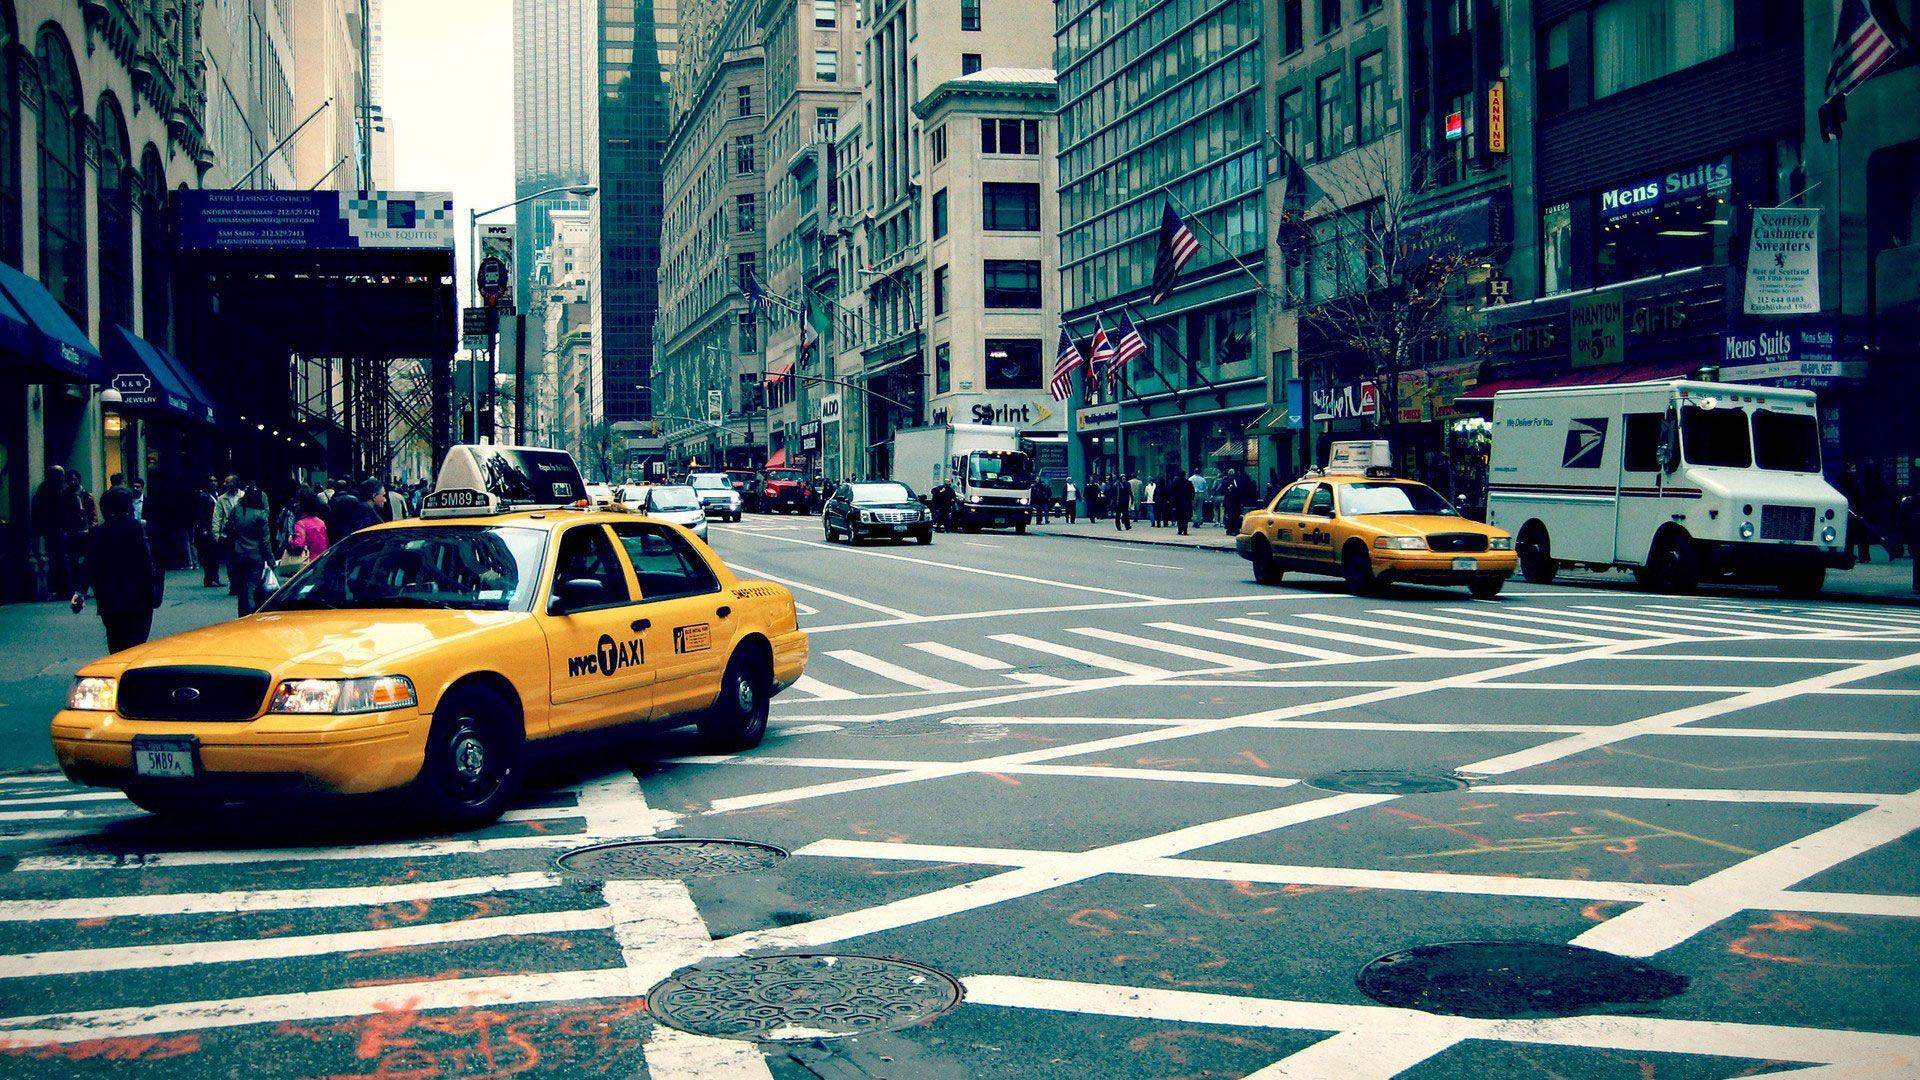 New York Cab Wallpapers Wallpaper Cave